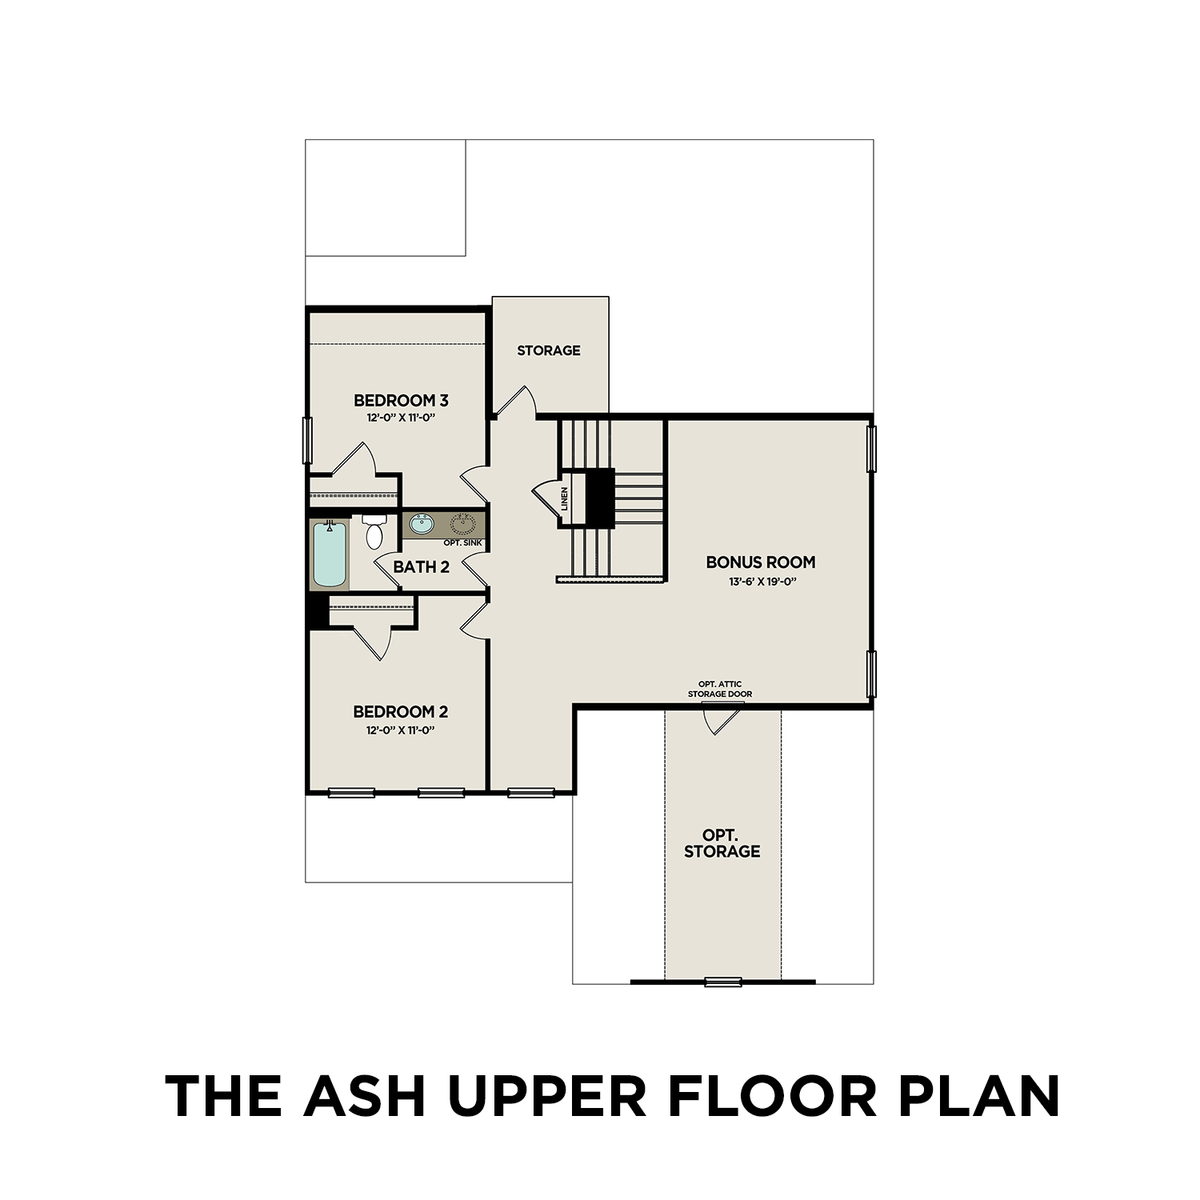 2 - The Ash B floor plan layout for 376 Turfway Park in Davidson Homes' Carellton community.